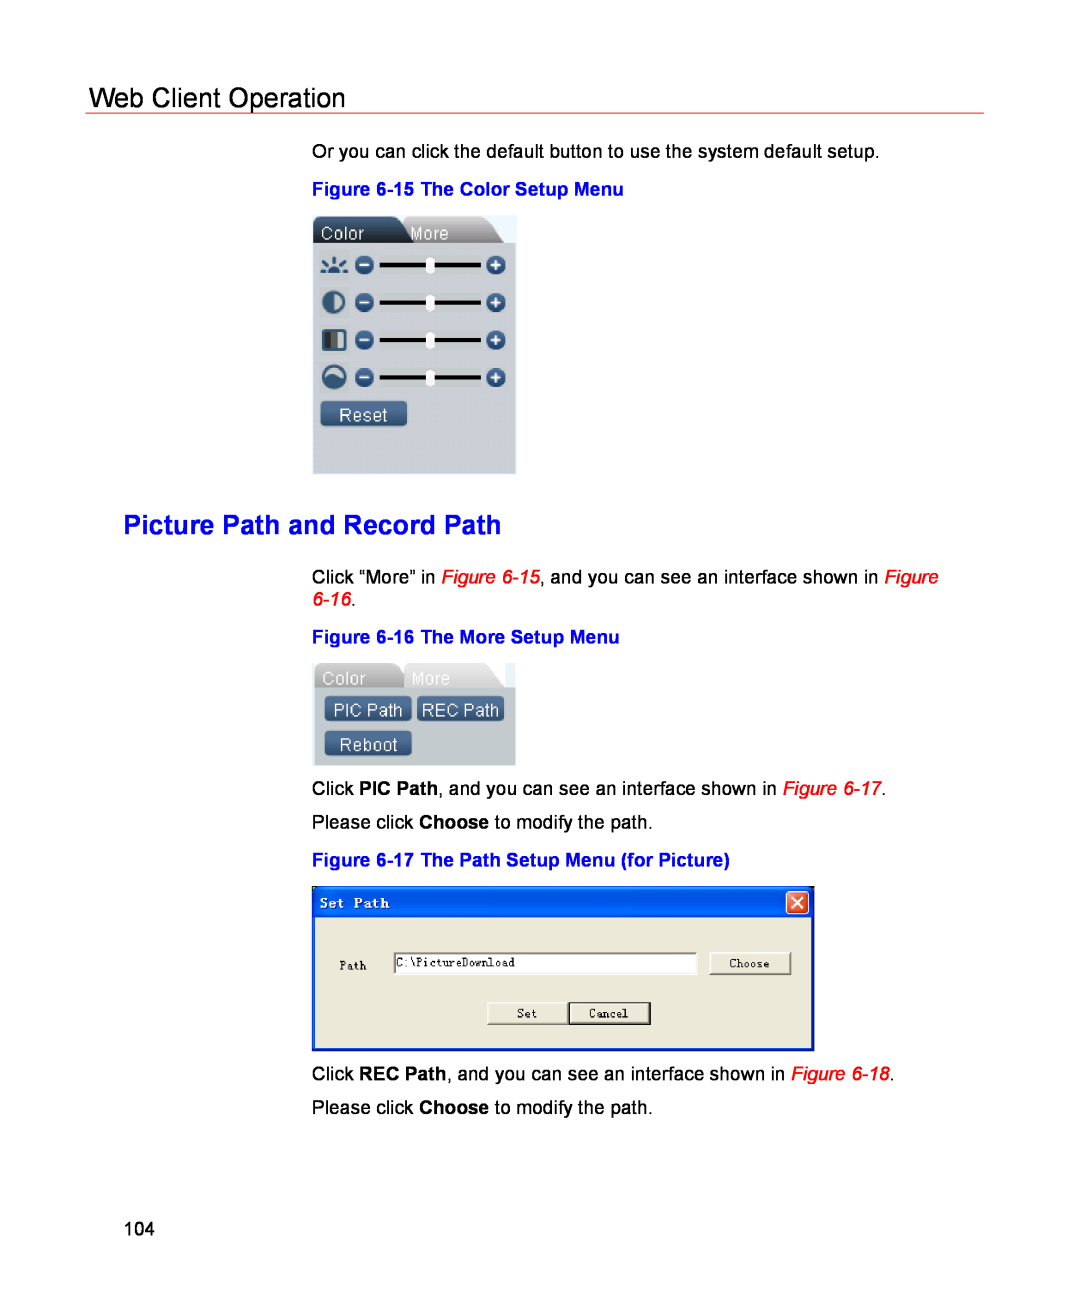 Honeywell HSVR-04 Picture Path and Record Path, Web Client Operation, 15 The Color Setup Menu, 16 The More Setup Menu 